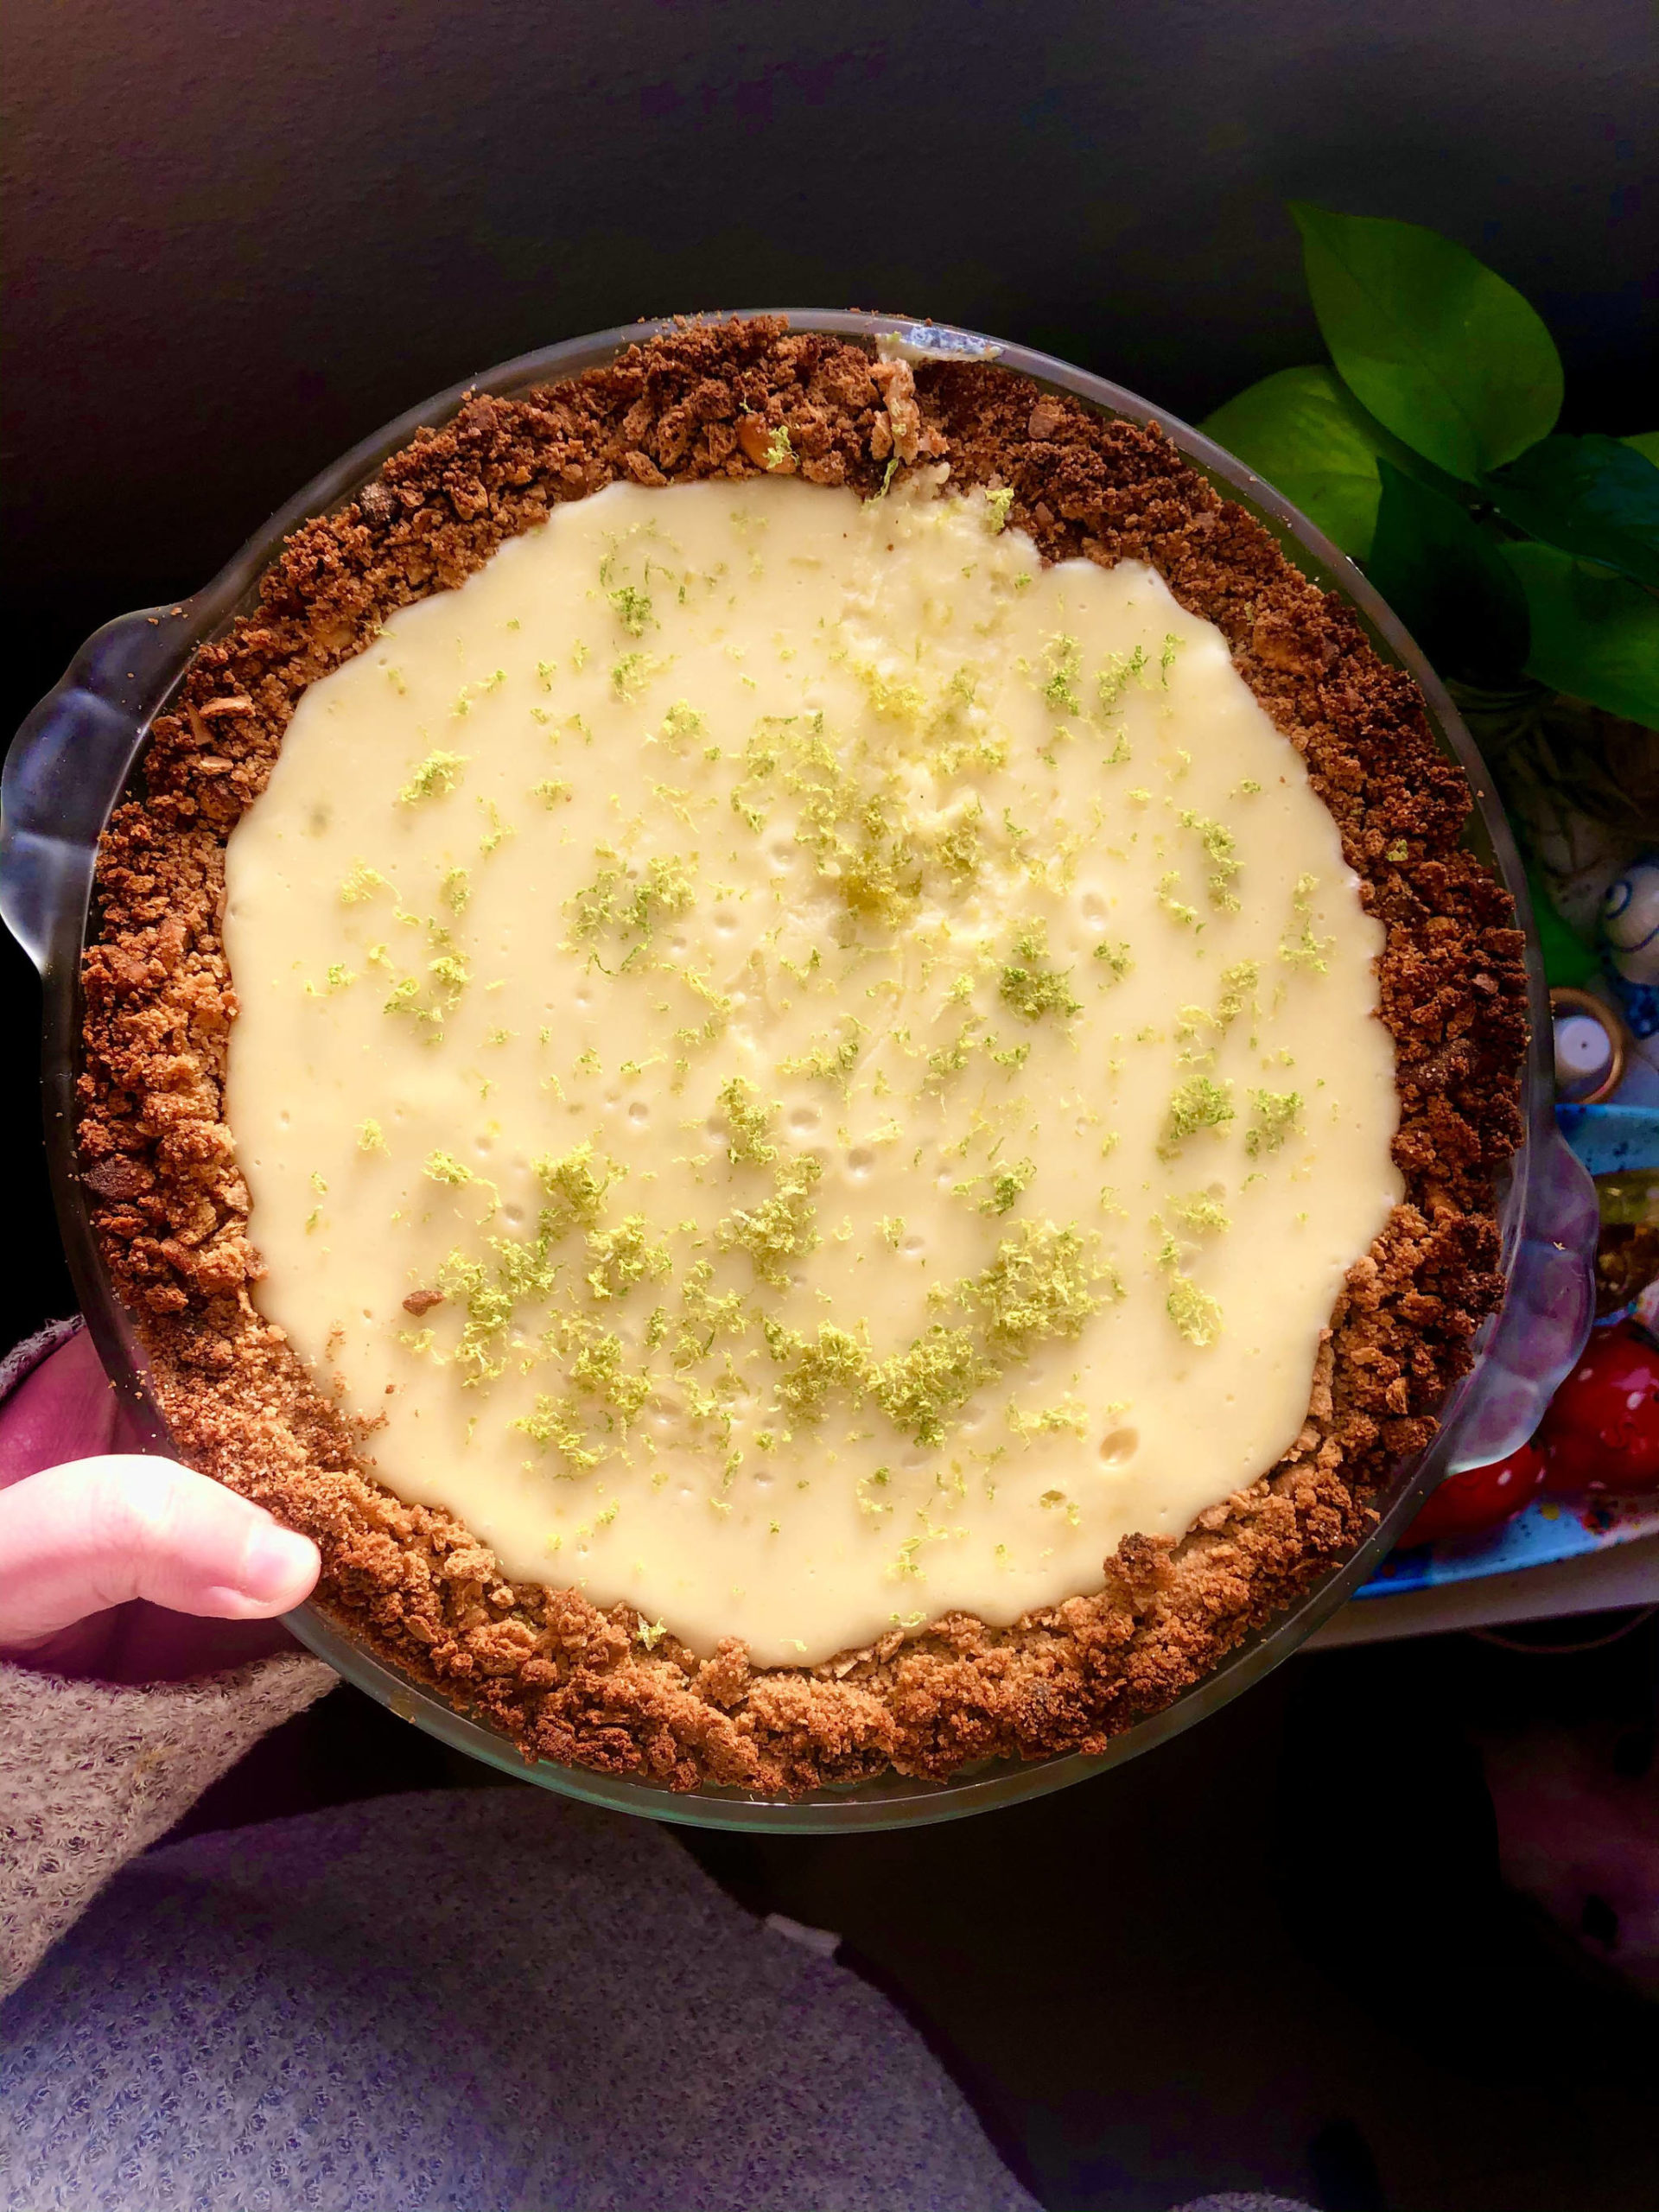 Key lime pie, inspired by a recipe from Kim Sunée, makes a refreshing winter dessert, on Wednesday, Jan. 20, in Anchorage, Alaska. (Photo by Victoria Petersen/Peninsula Clarion)